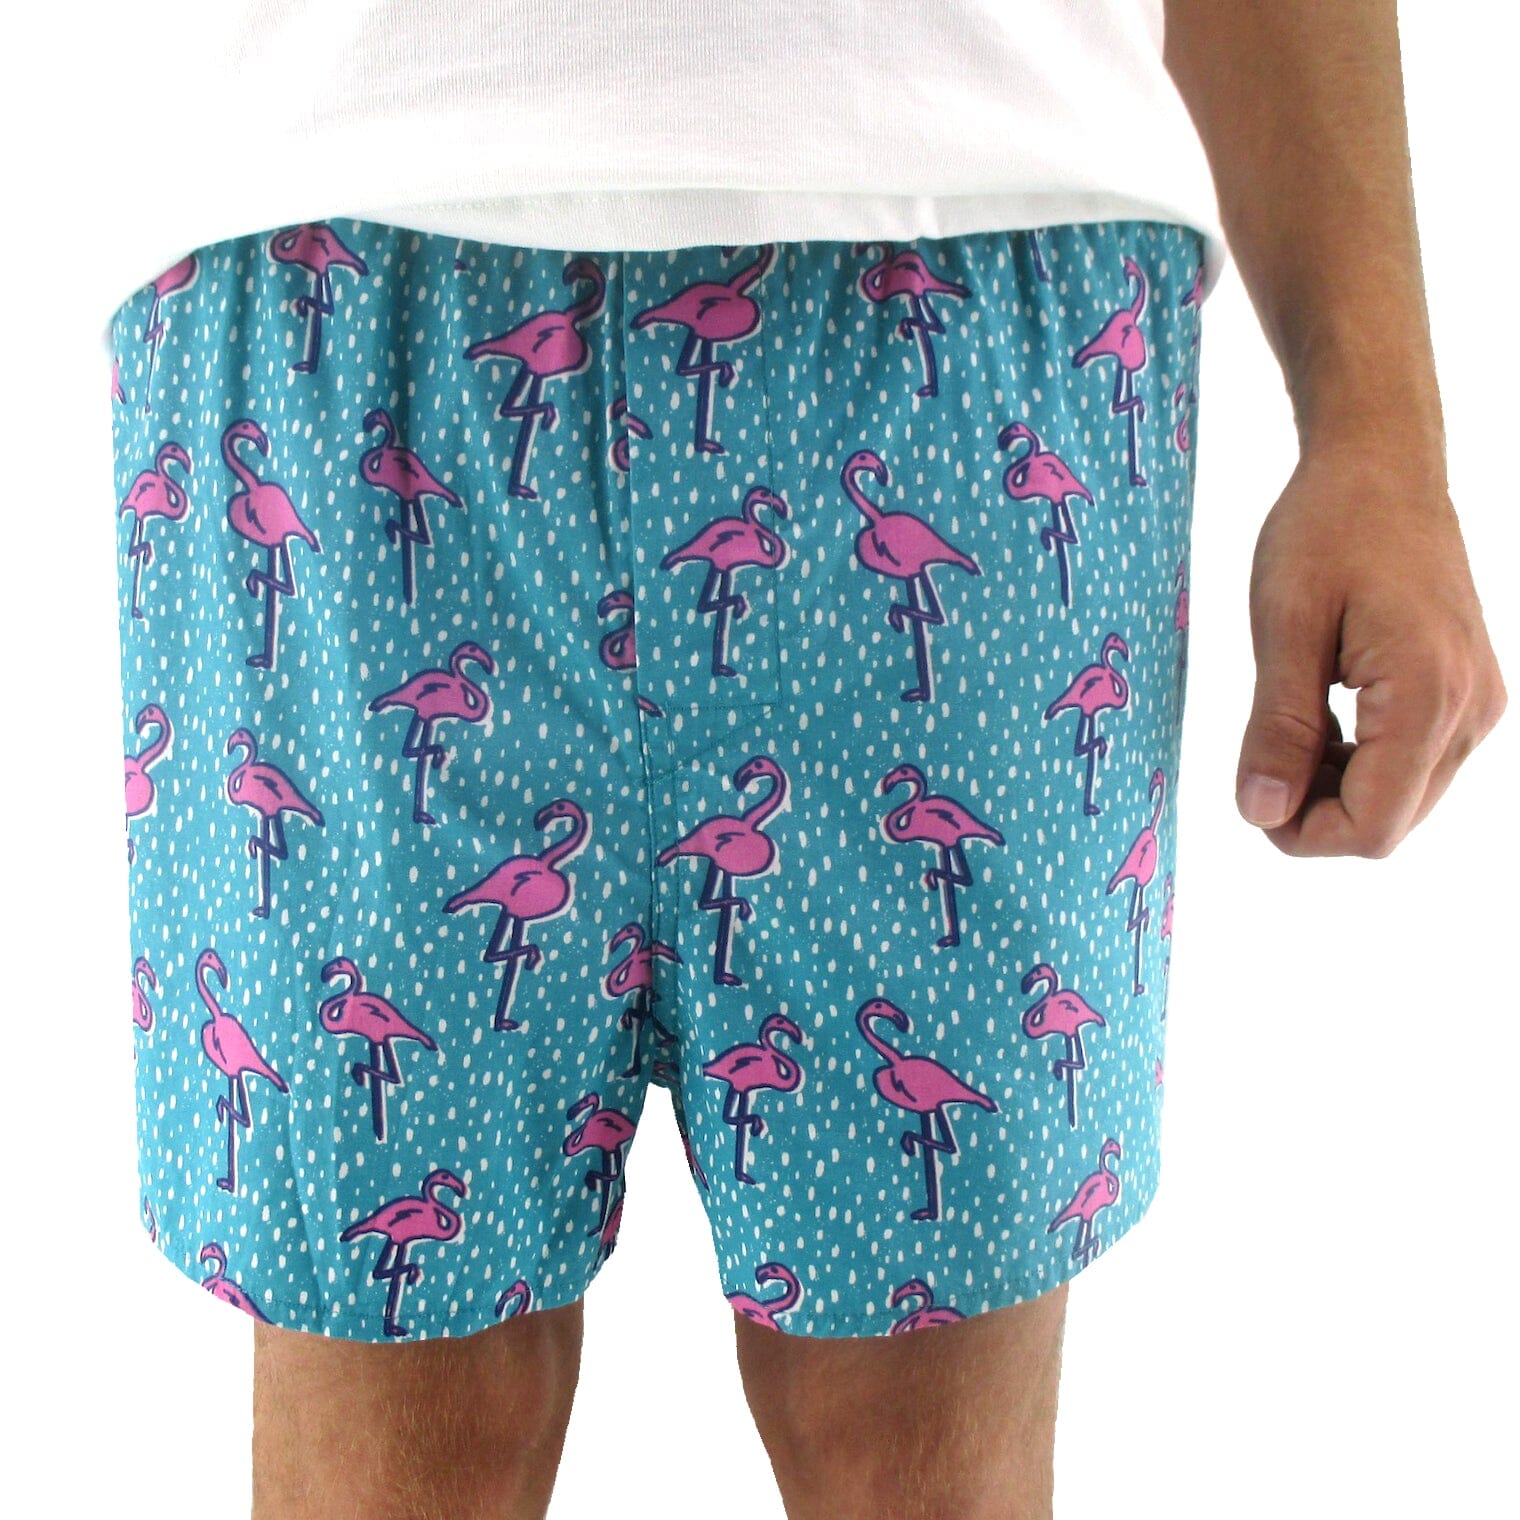 Men's Colorful Flamingo Patterned Boxer Shorts Underwear in Blue